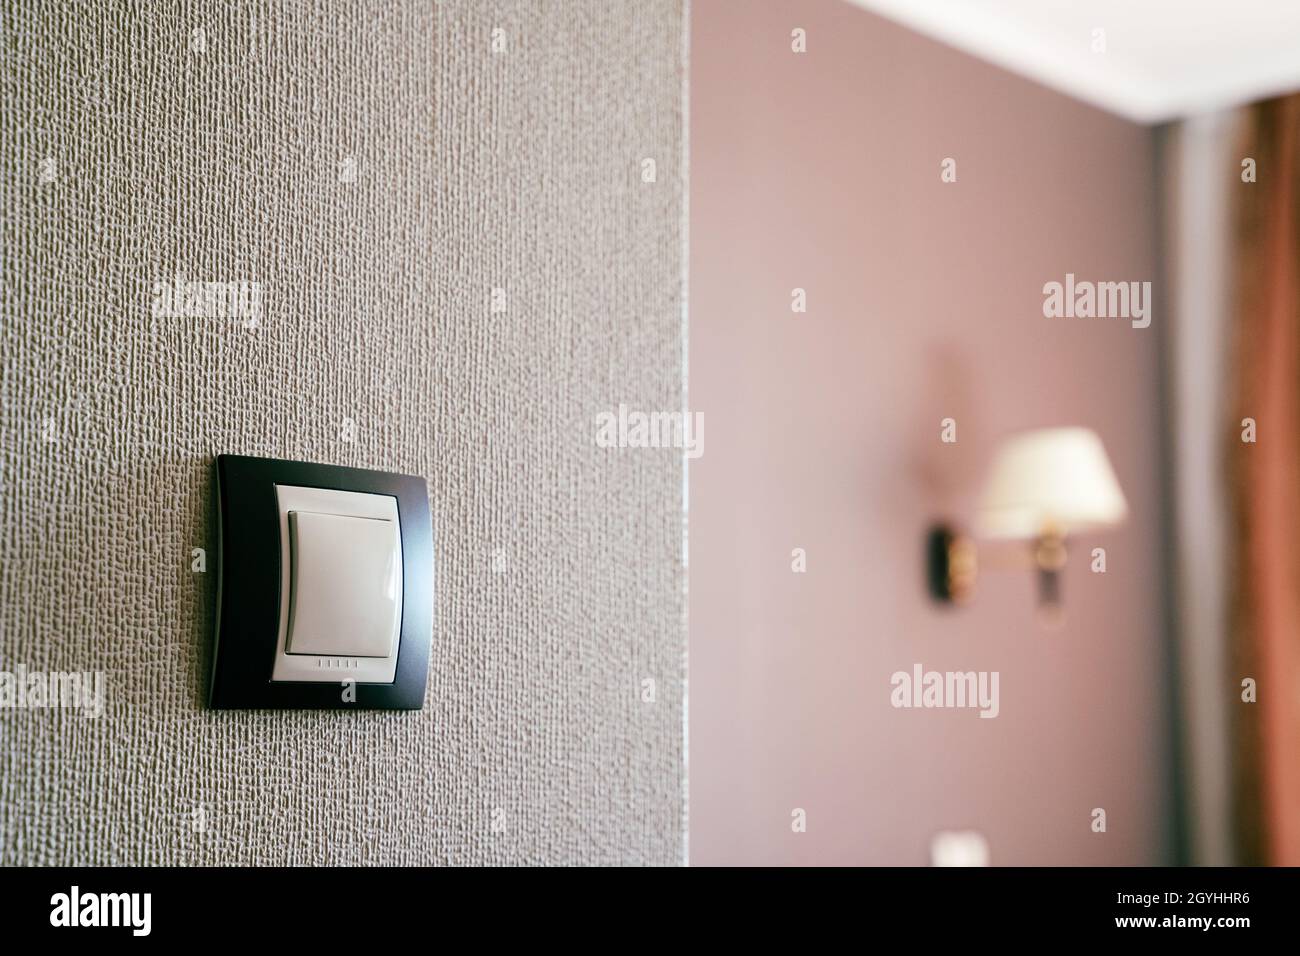 front view closeup of white light plastic switch socket on textured wall with home interior in the background Stock Photo